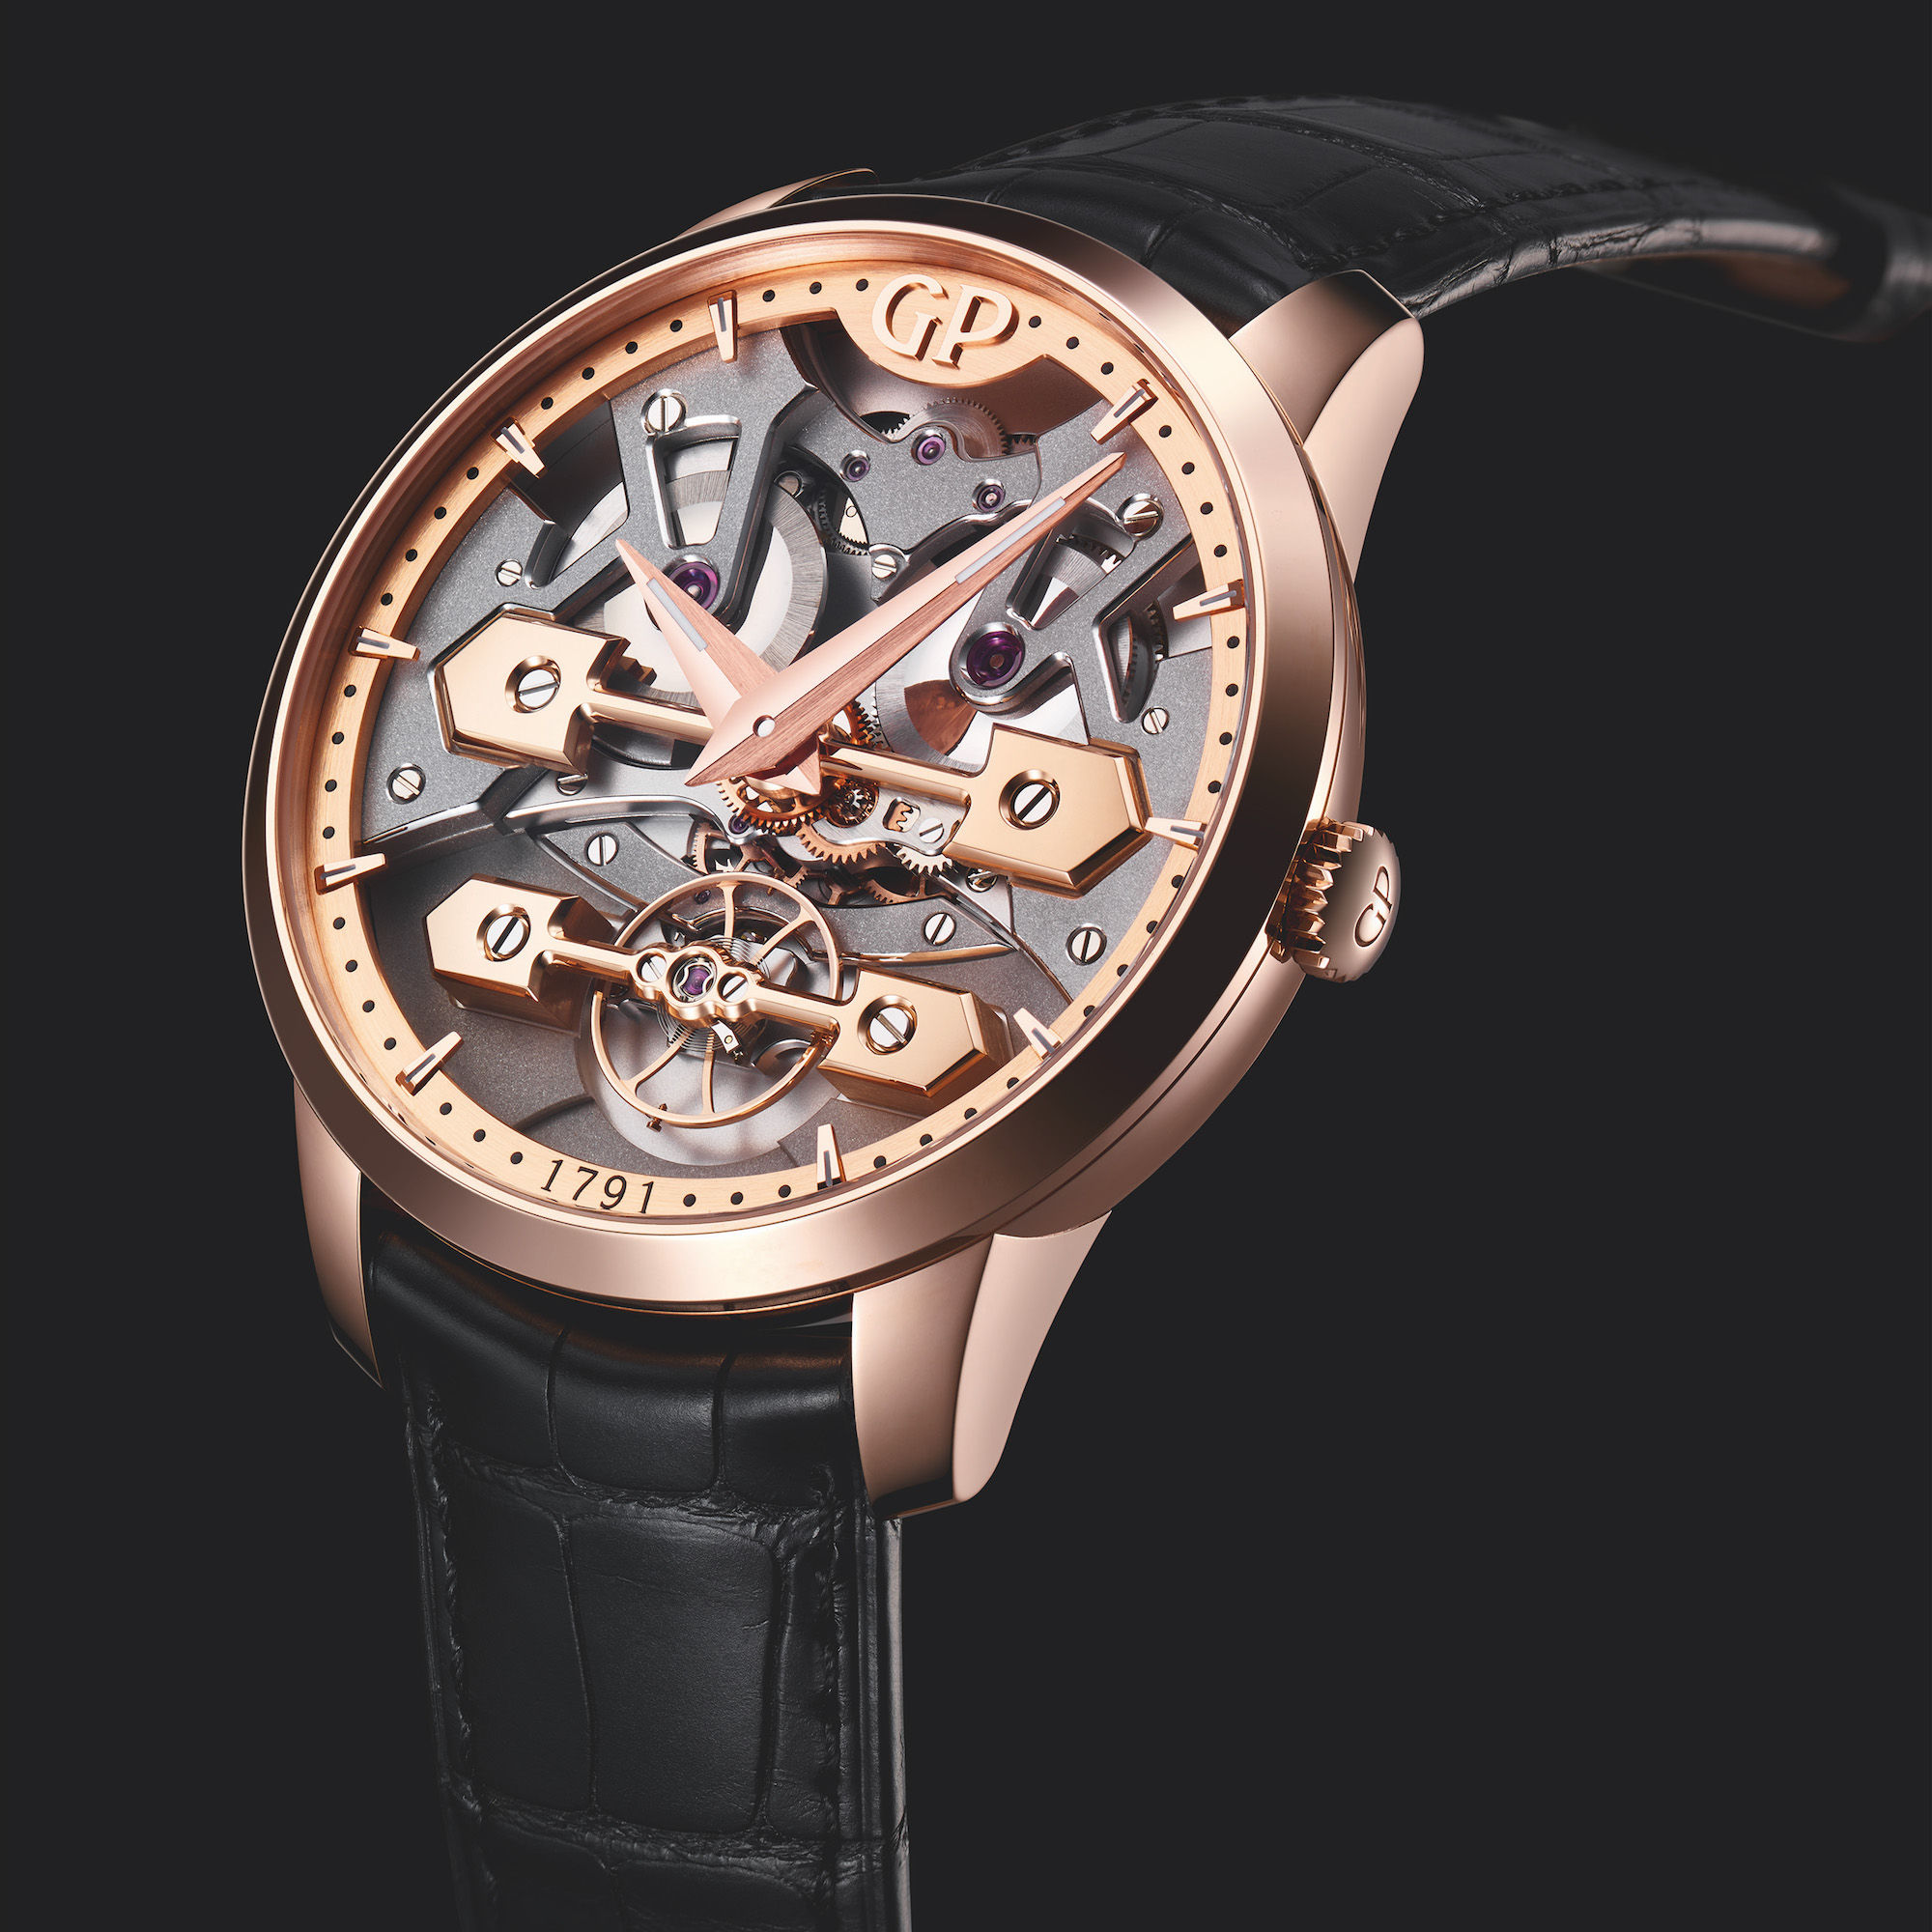 Girard-Perregaux returns to SIHH with a trio of highly mesmerising tourbillons